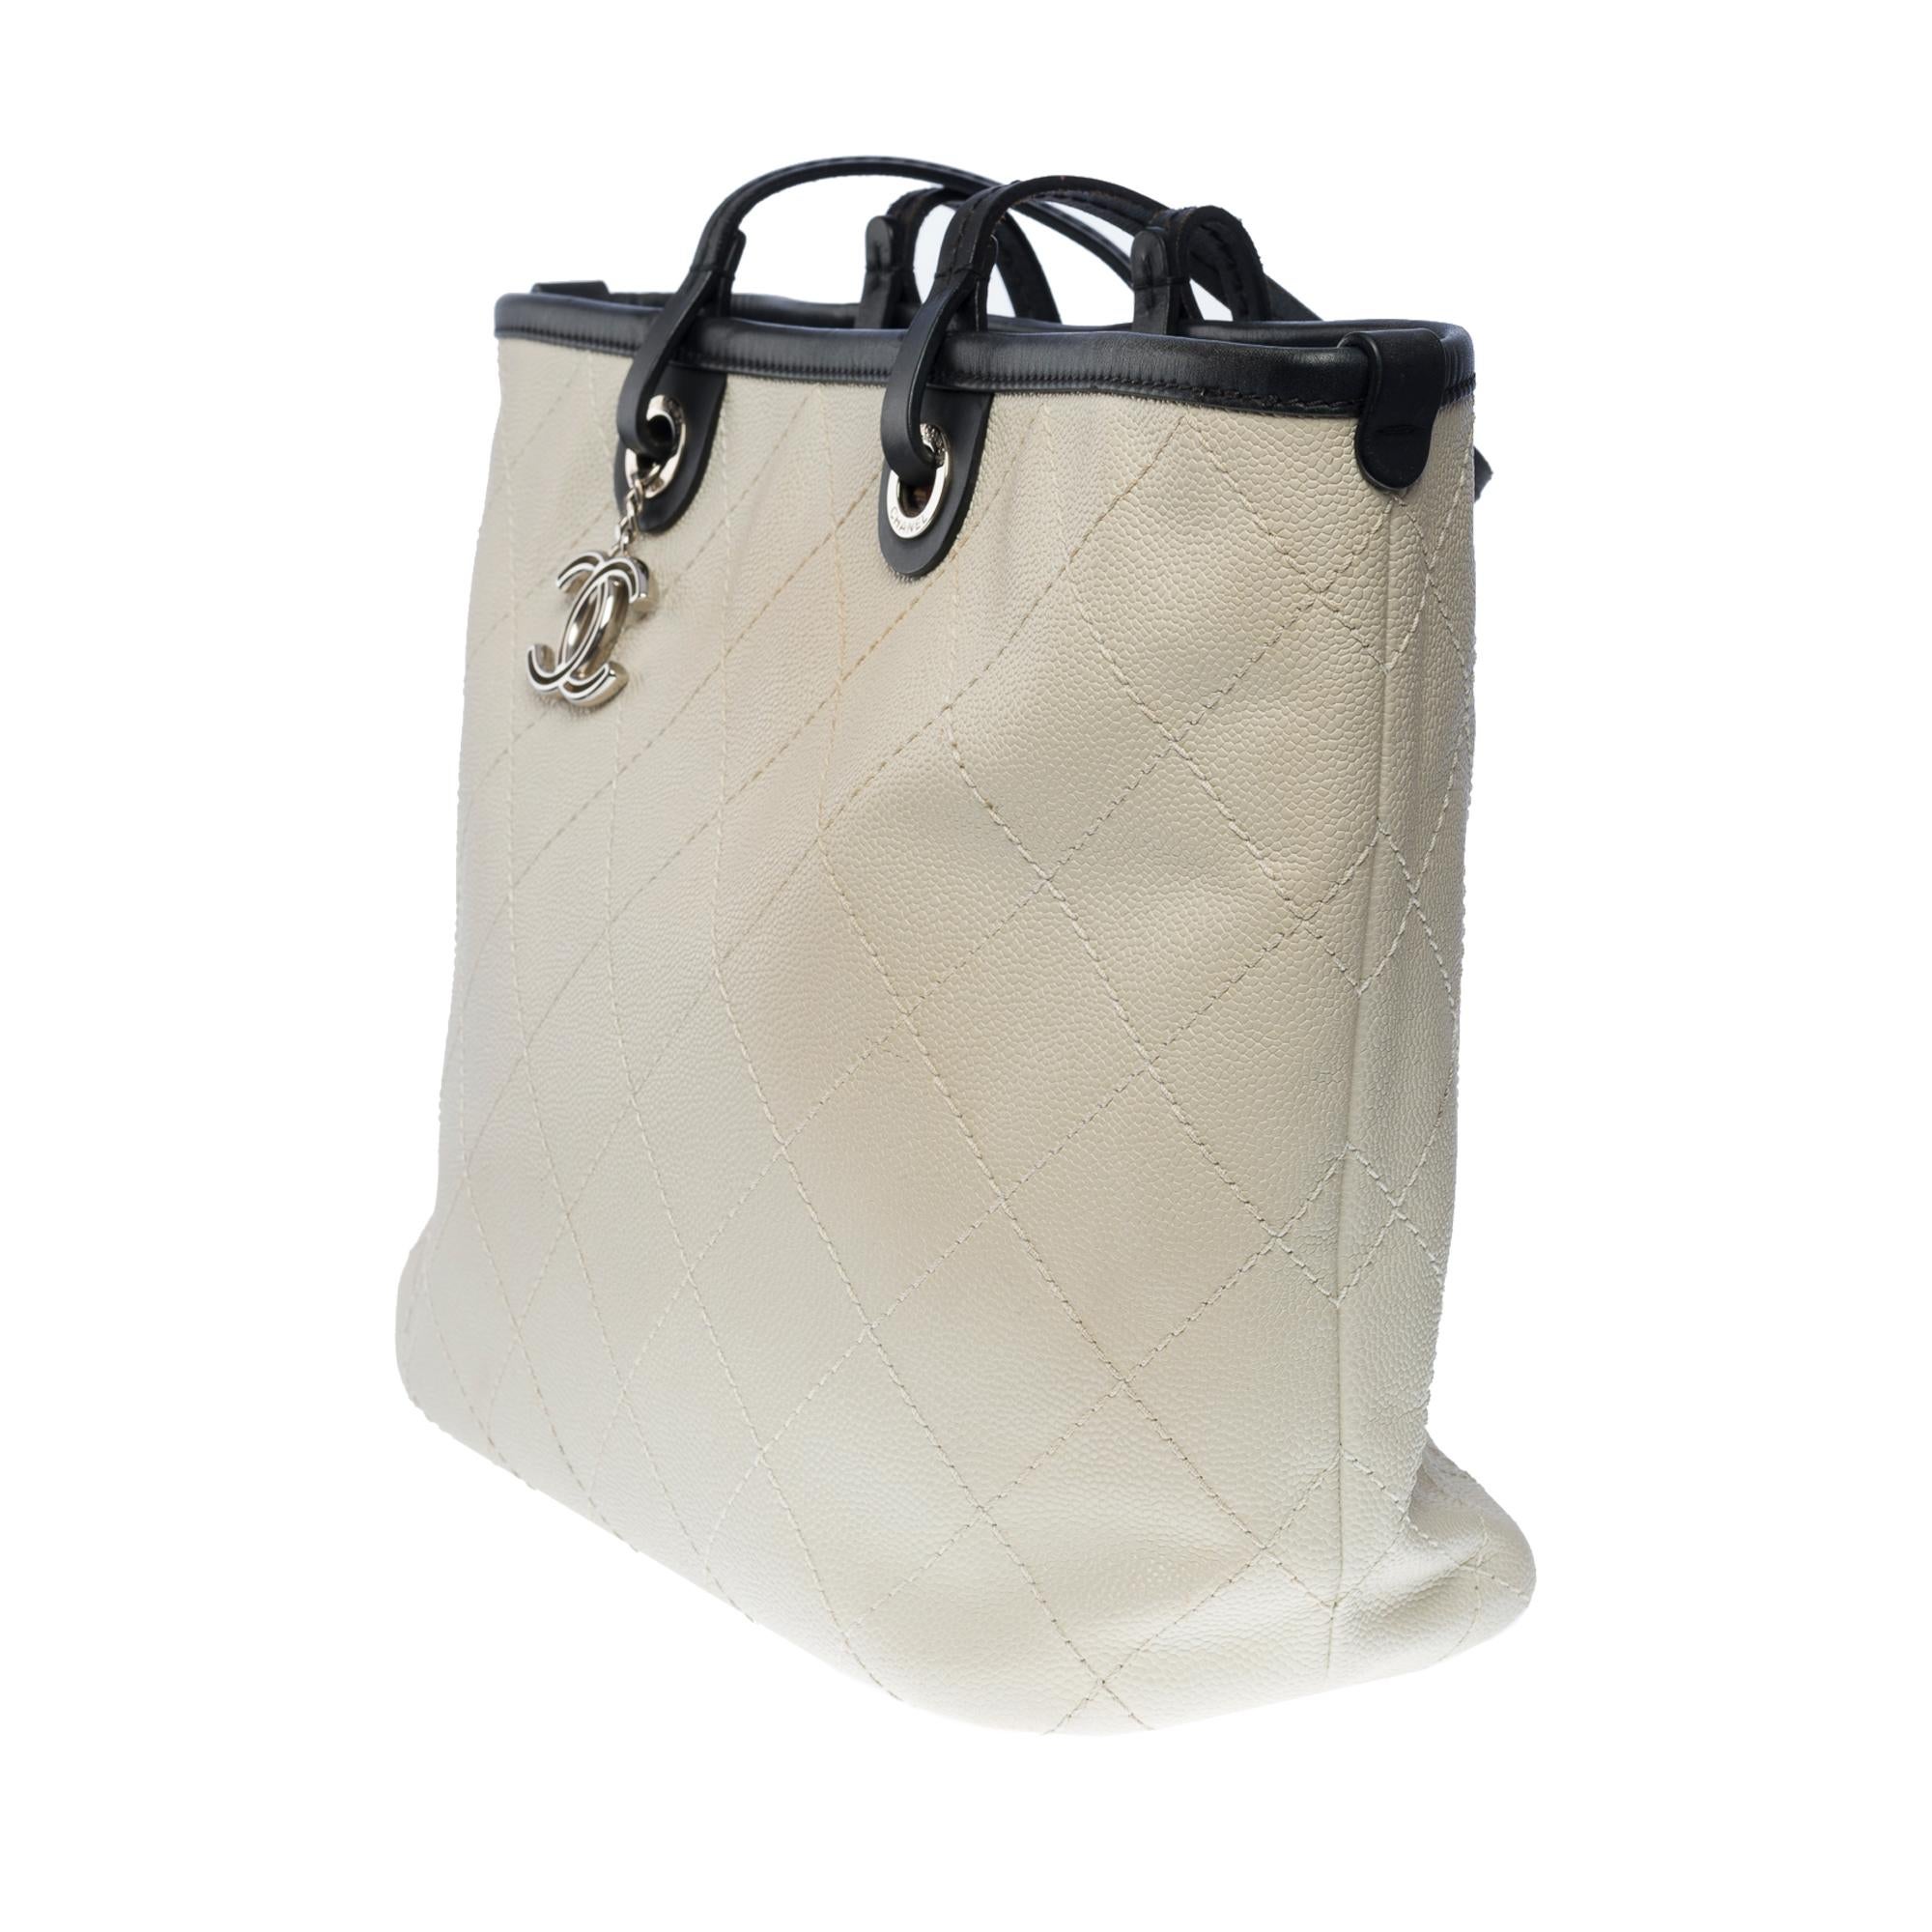 Women's Amazing Chanel Shopping Tote bag in White Caviar quilted leather, SHW